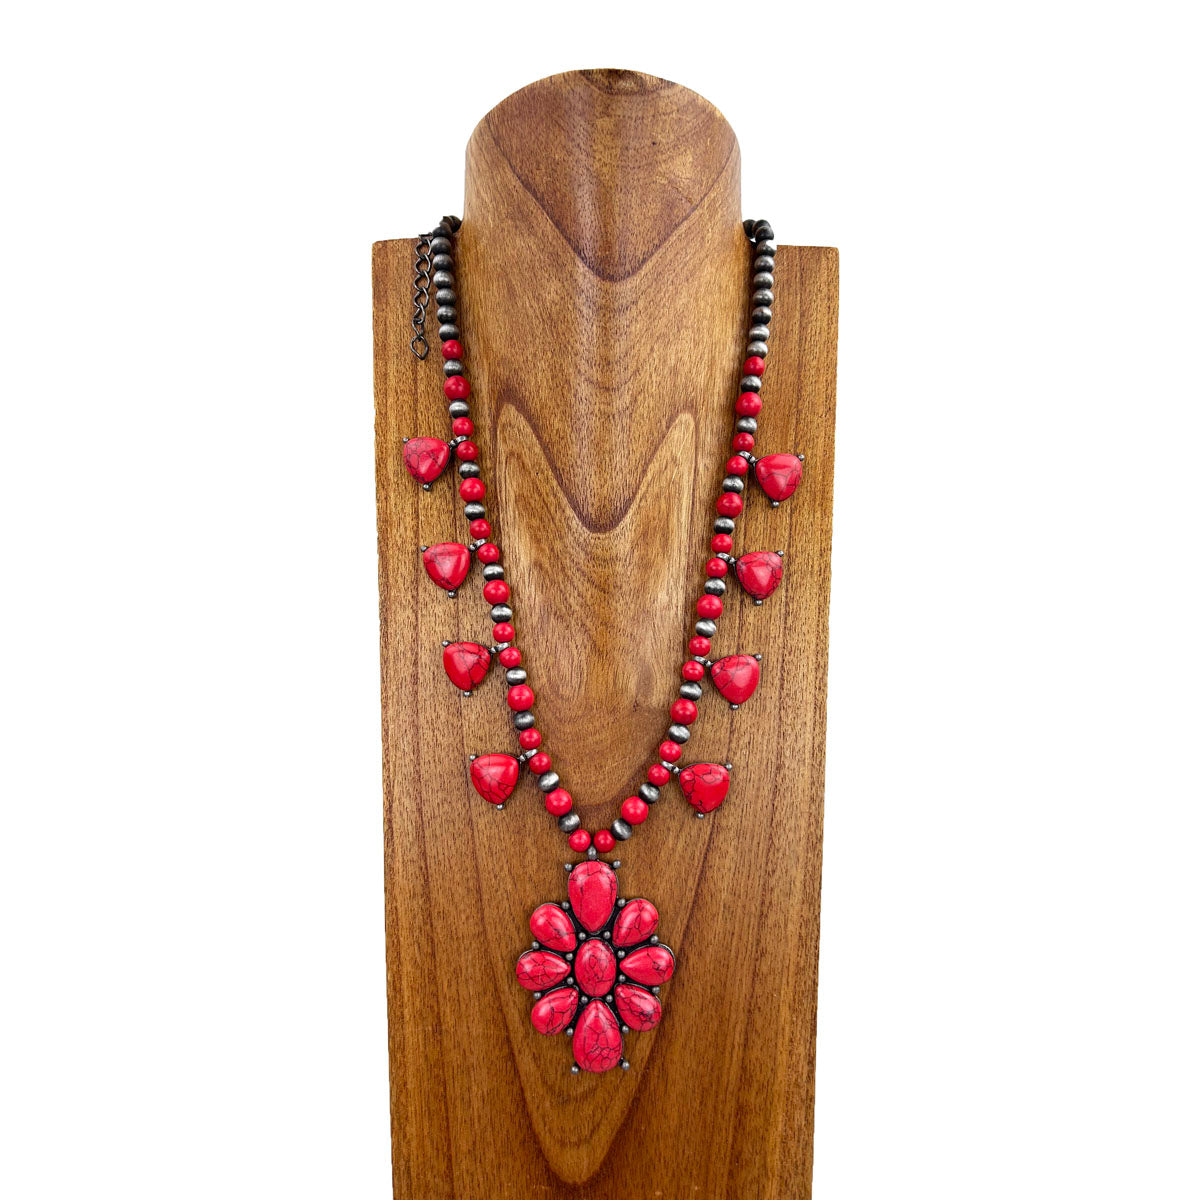 NKY221015-02-RED      "24 Inches red stone and silver Navajo pearl beads necklace  with red stone concho pendent"